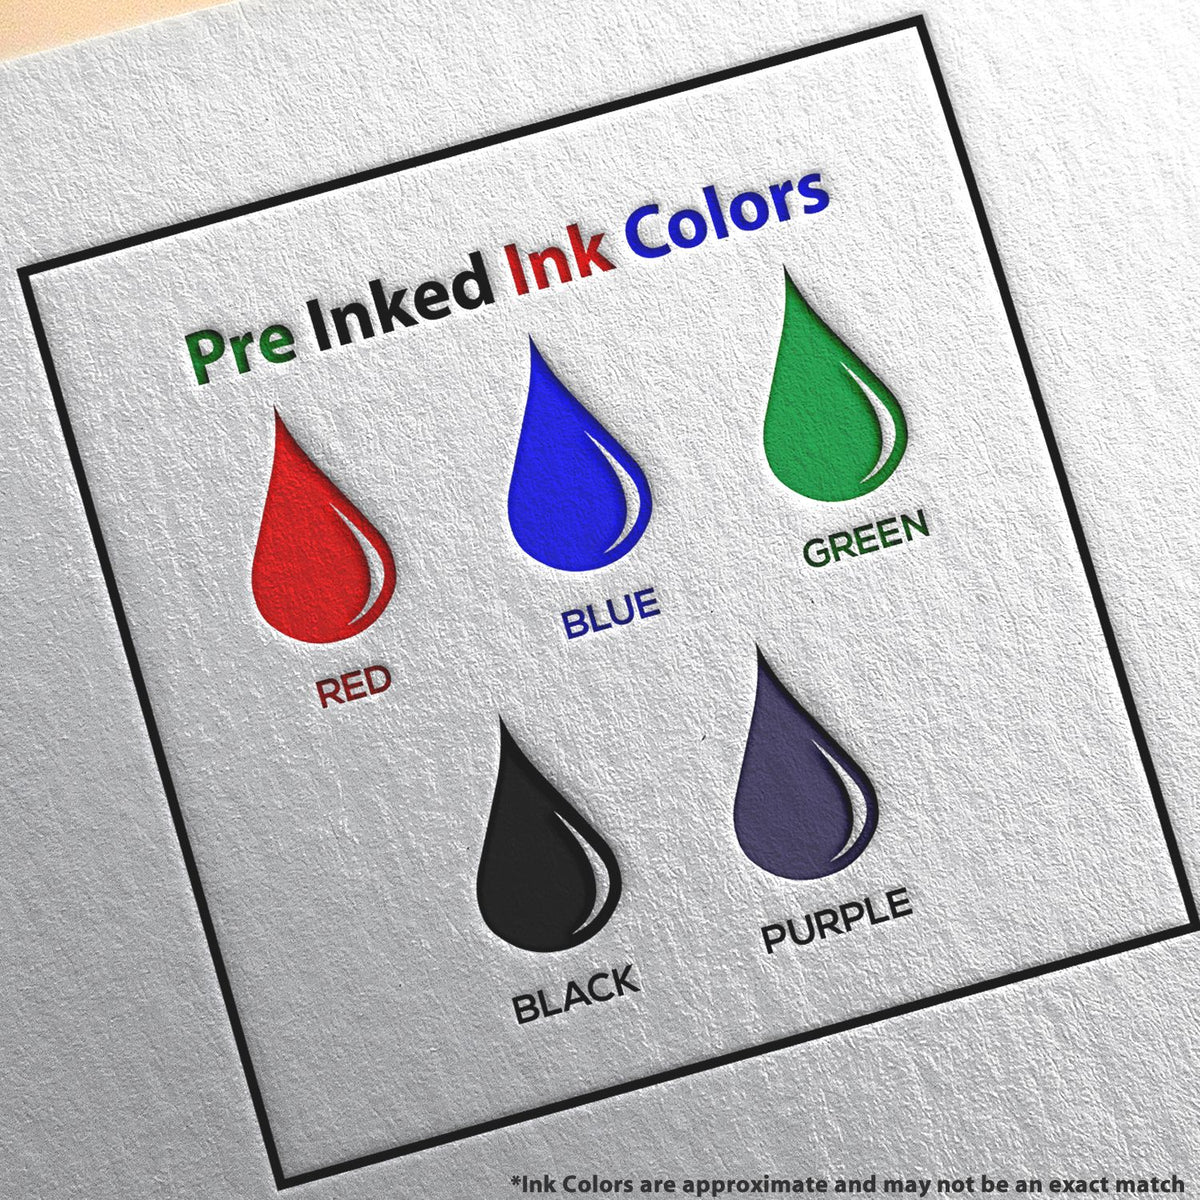 A picture showing the different ink colors or hues available for the Slim Pre-Inked Tennessee Land Surveyor Seal Stamp product.